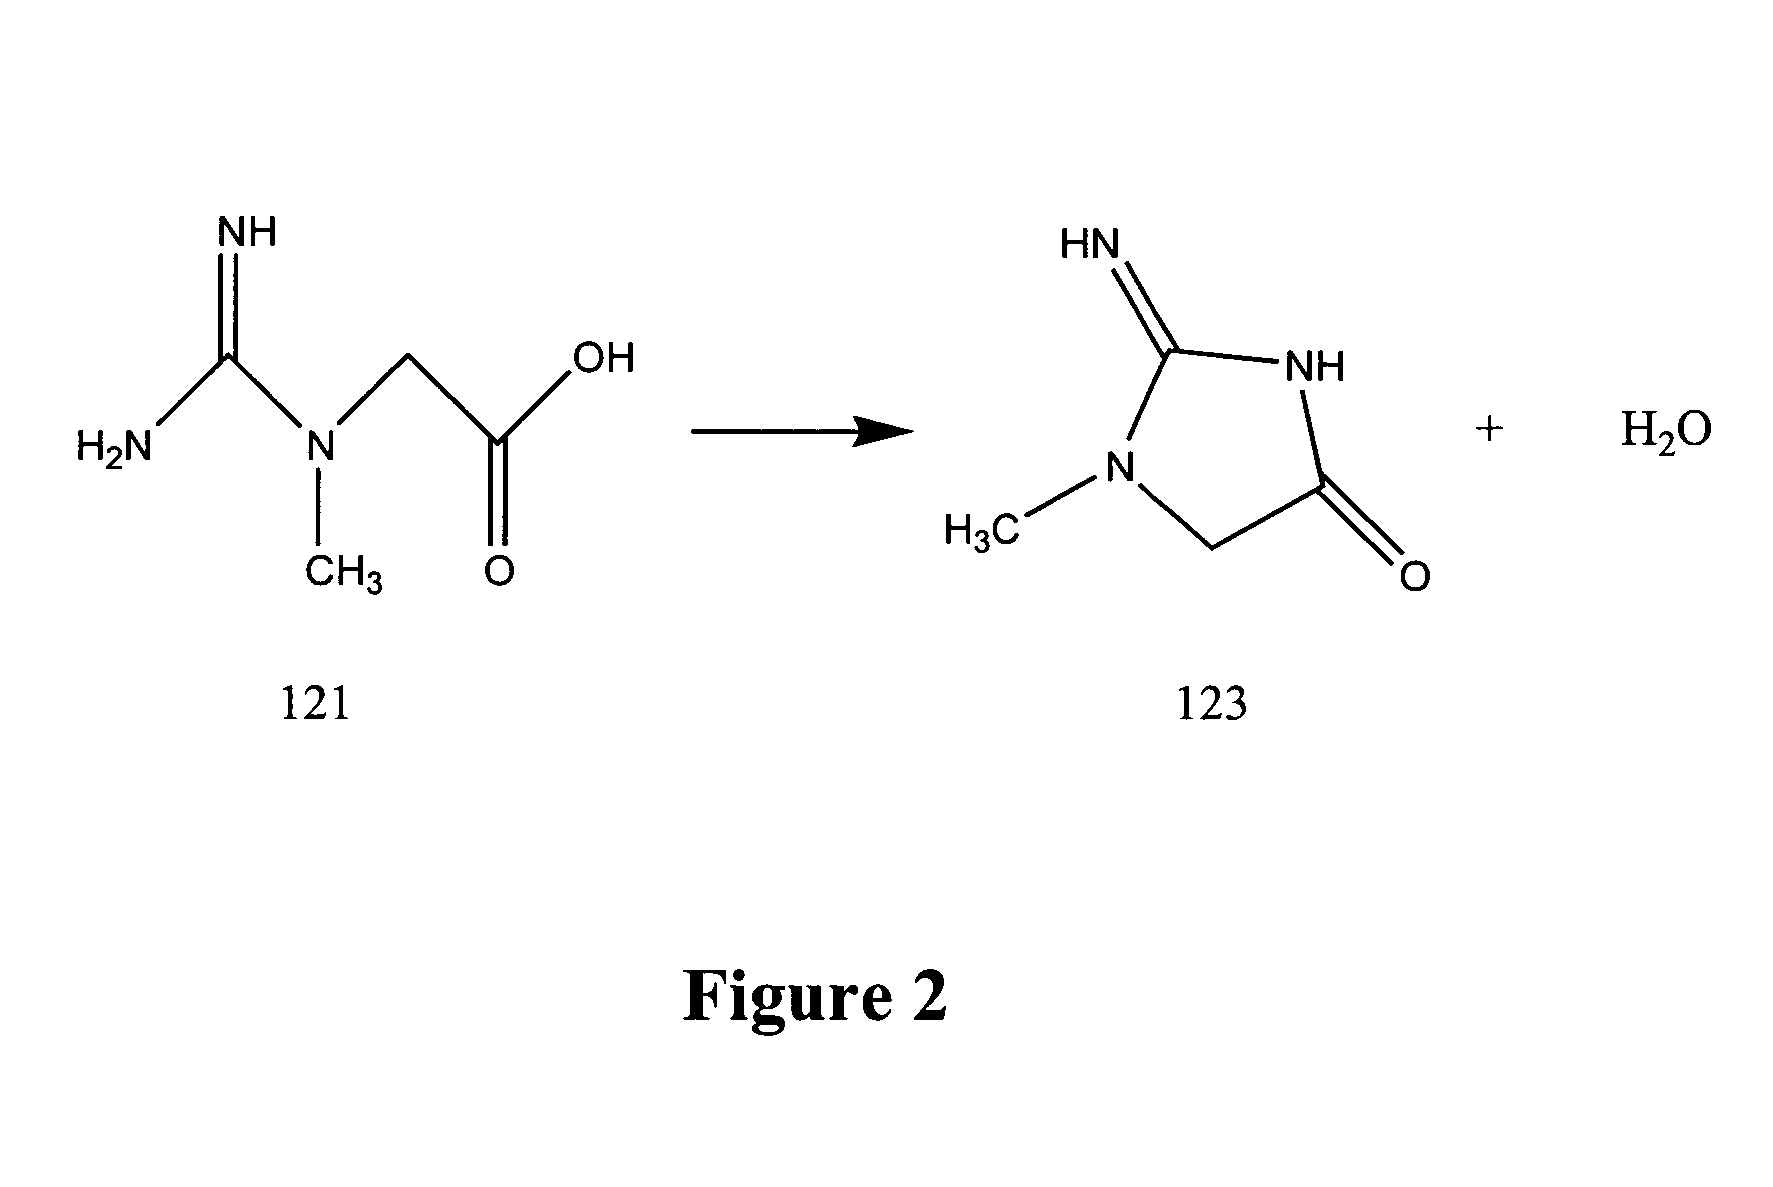 Production of creatine esters using in situ acid production